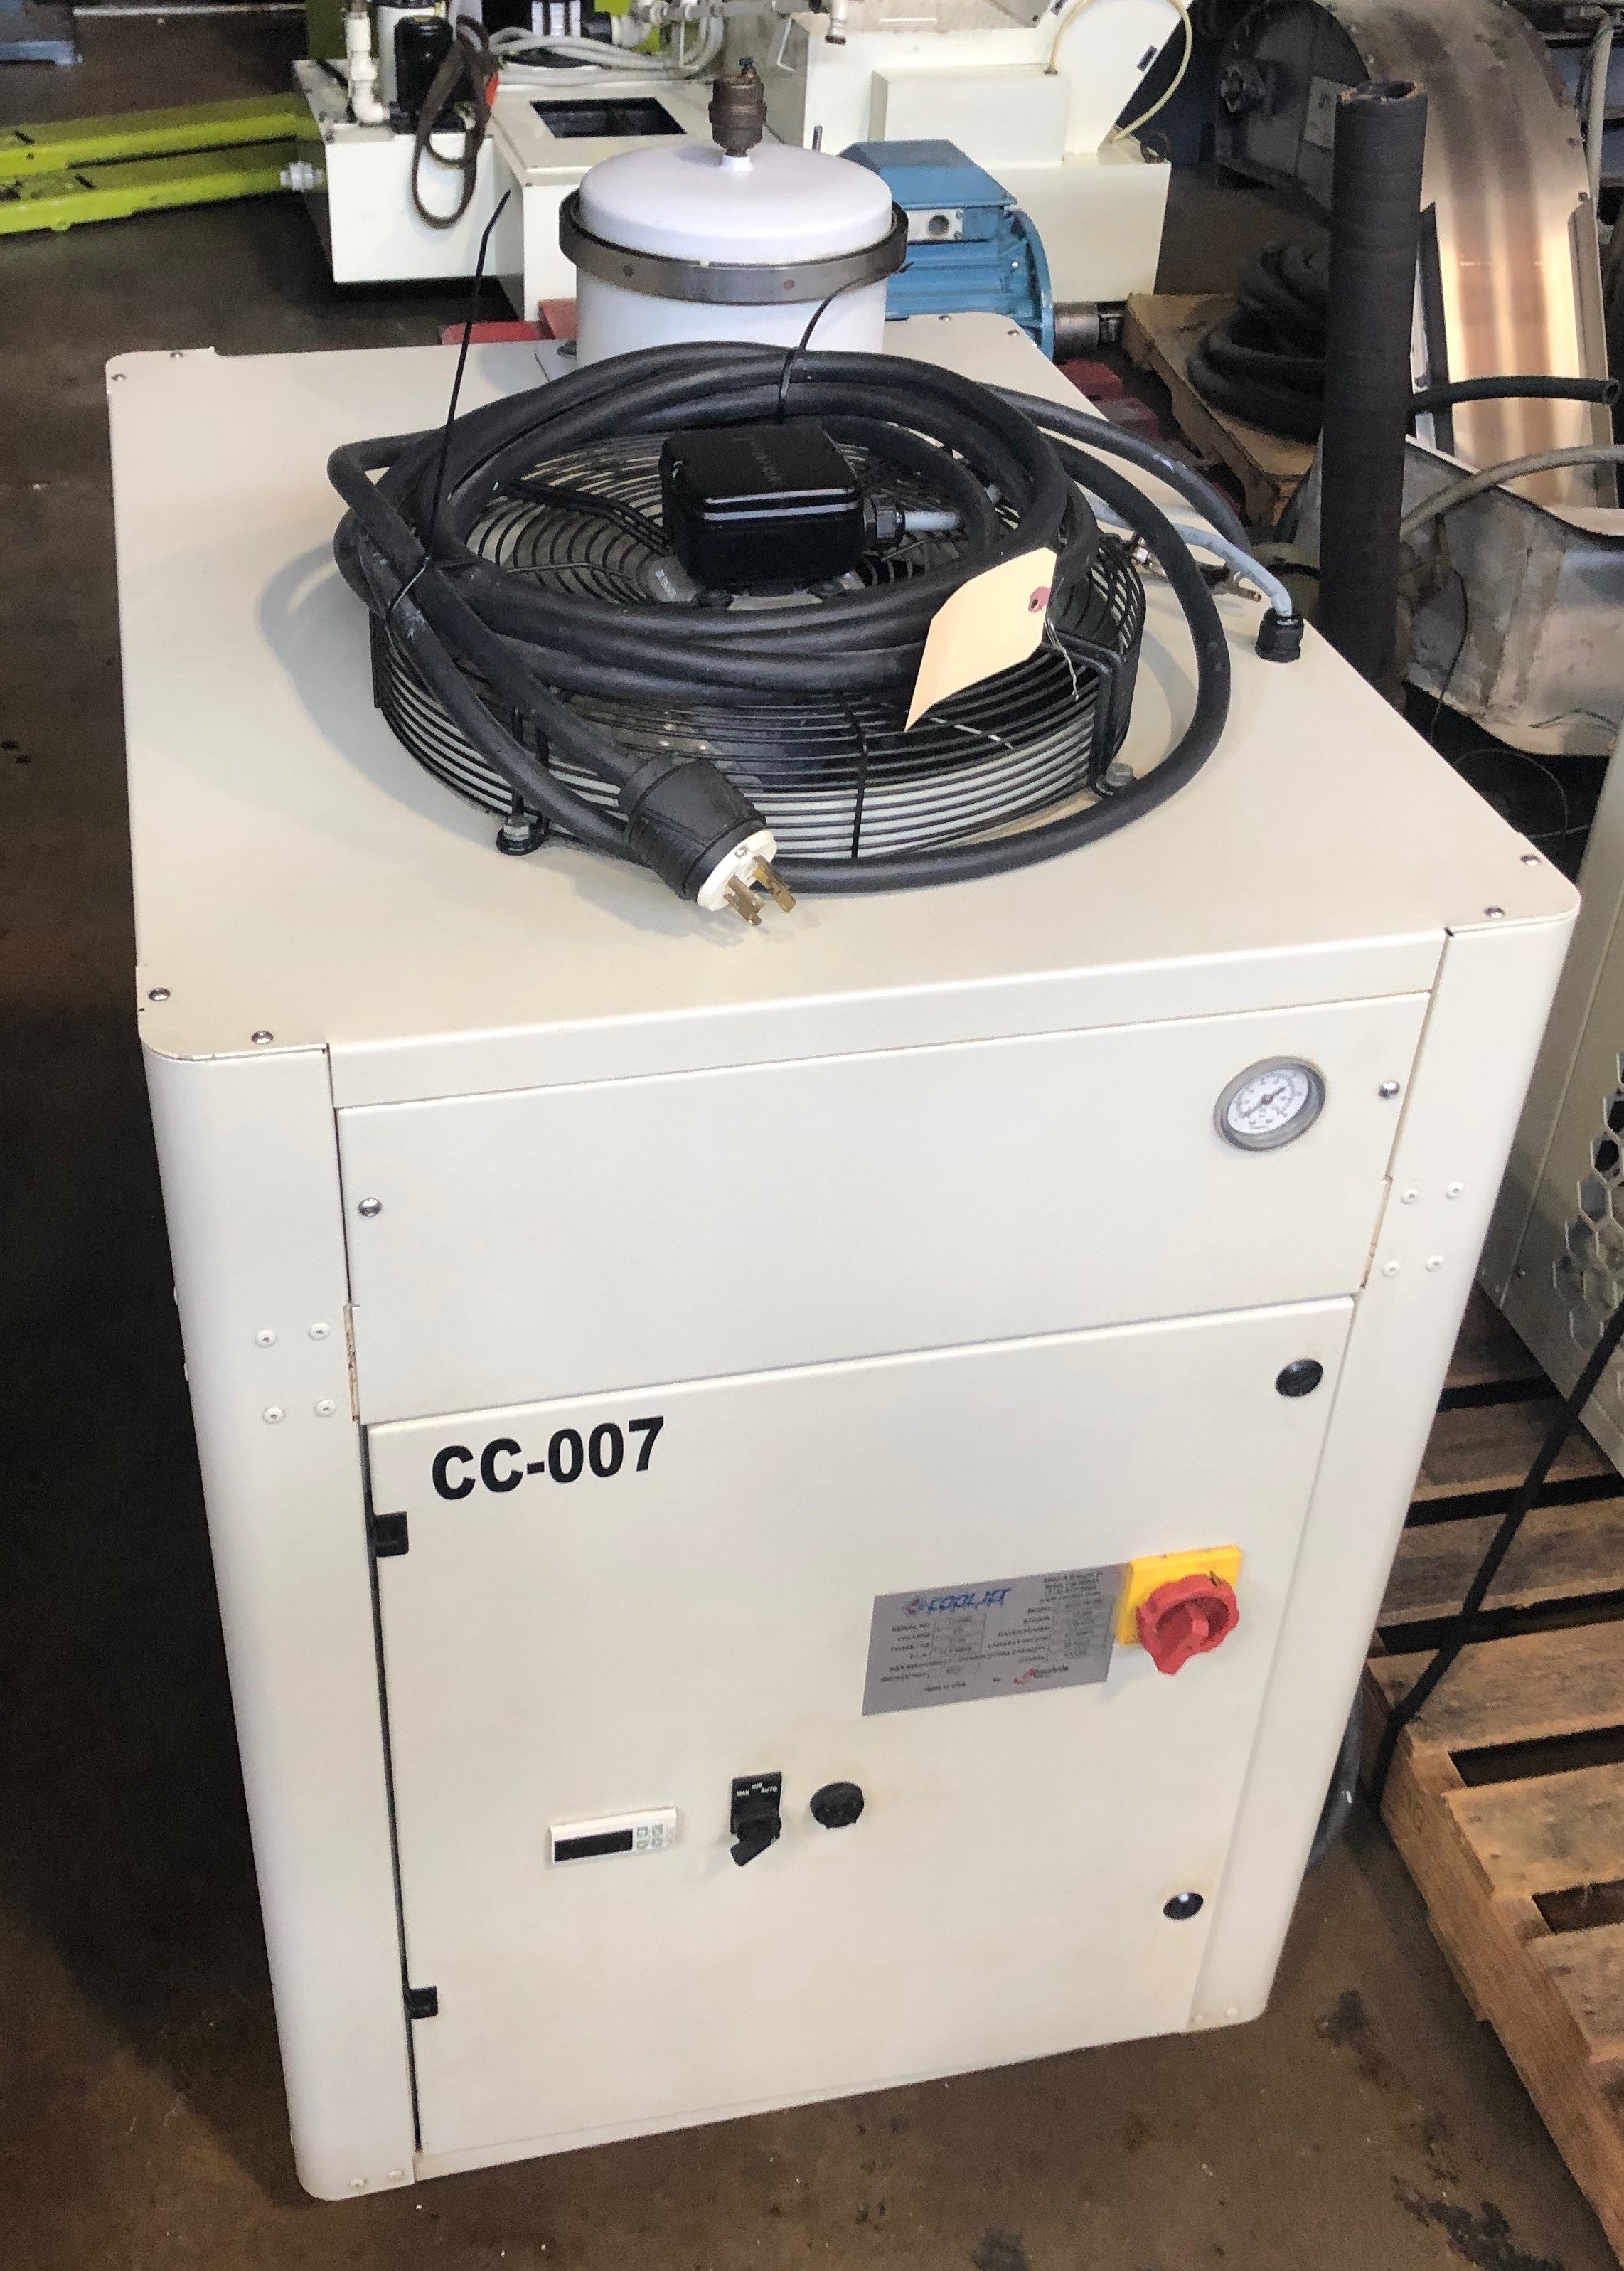 Cool Jet Systems AC24-FP-230 Coolant Chiller, CoolJet Systems 24,000 BTU Coolant Chiller, Like New Coolant Chiller For Sale, 24,000 BTU Coolant Chiller For Sale